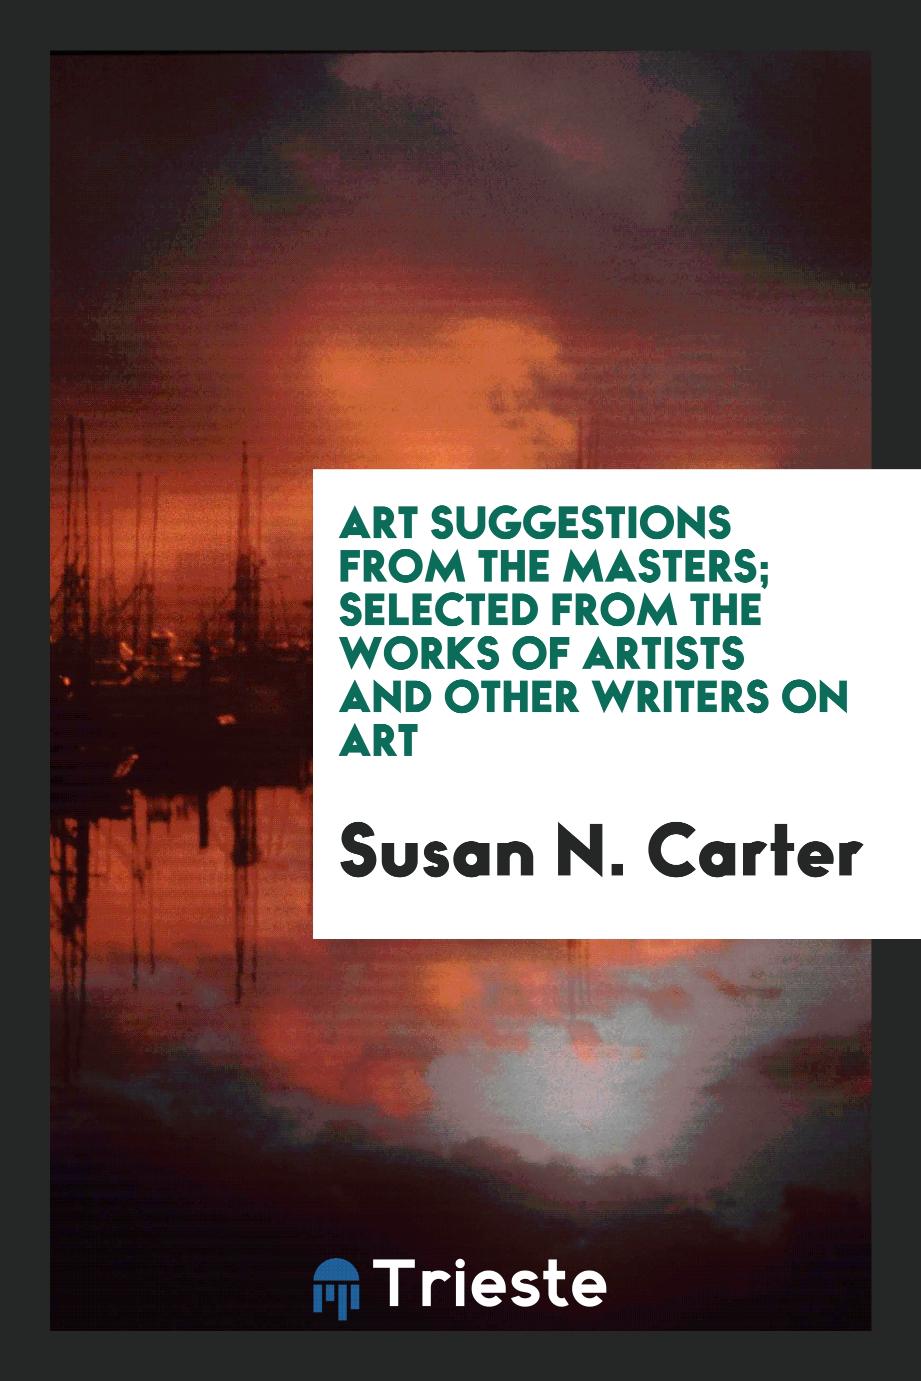 Art suggestions from the masters; selected from the works of artists and other writers on art